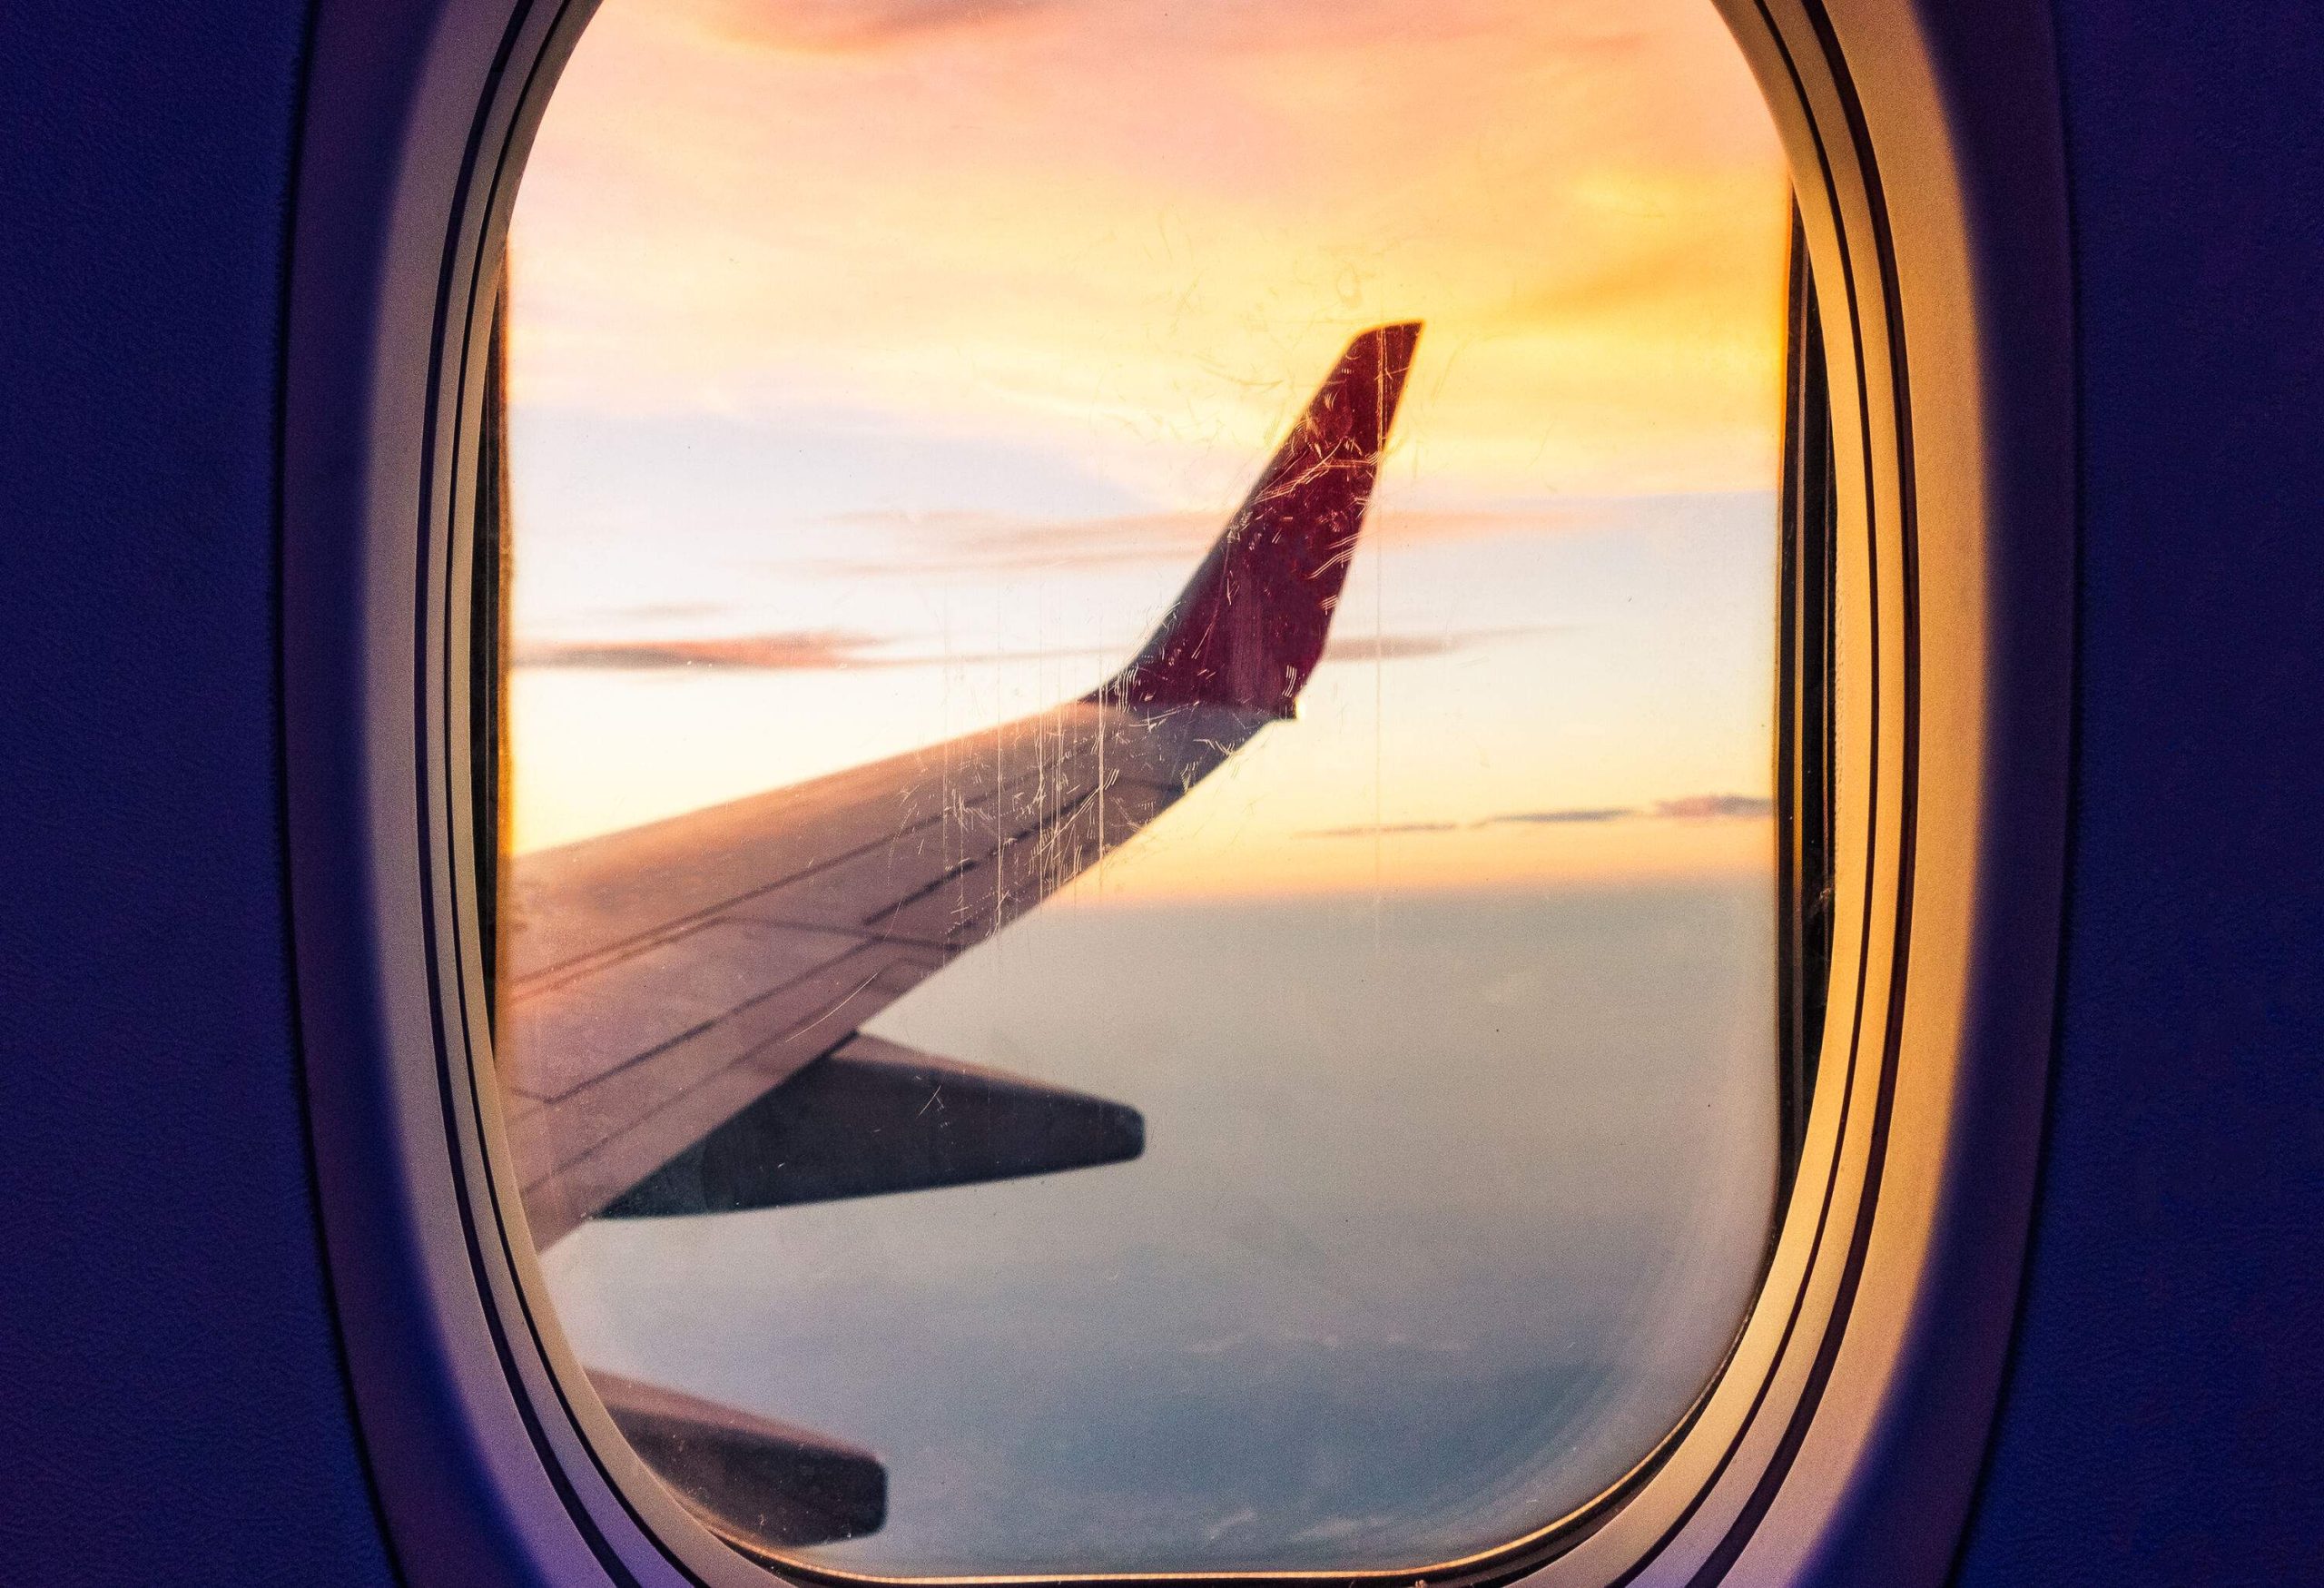 The aircraft wing against a scenic sunset sky viewed from the plane's window.